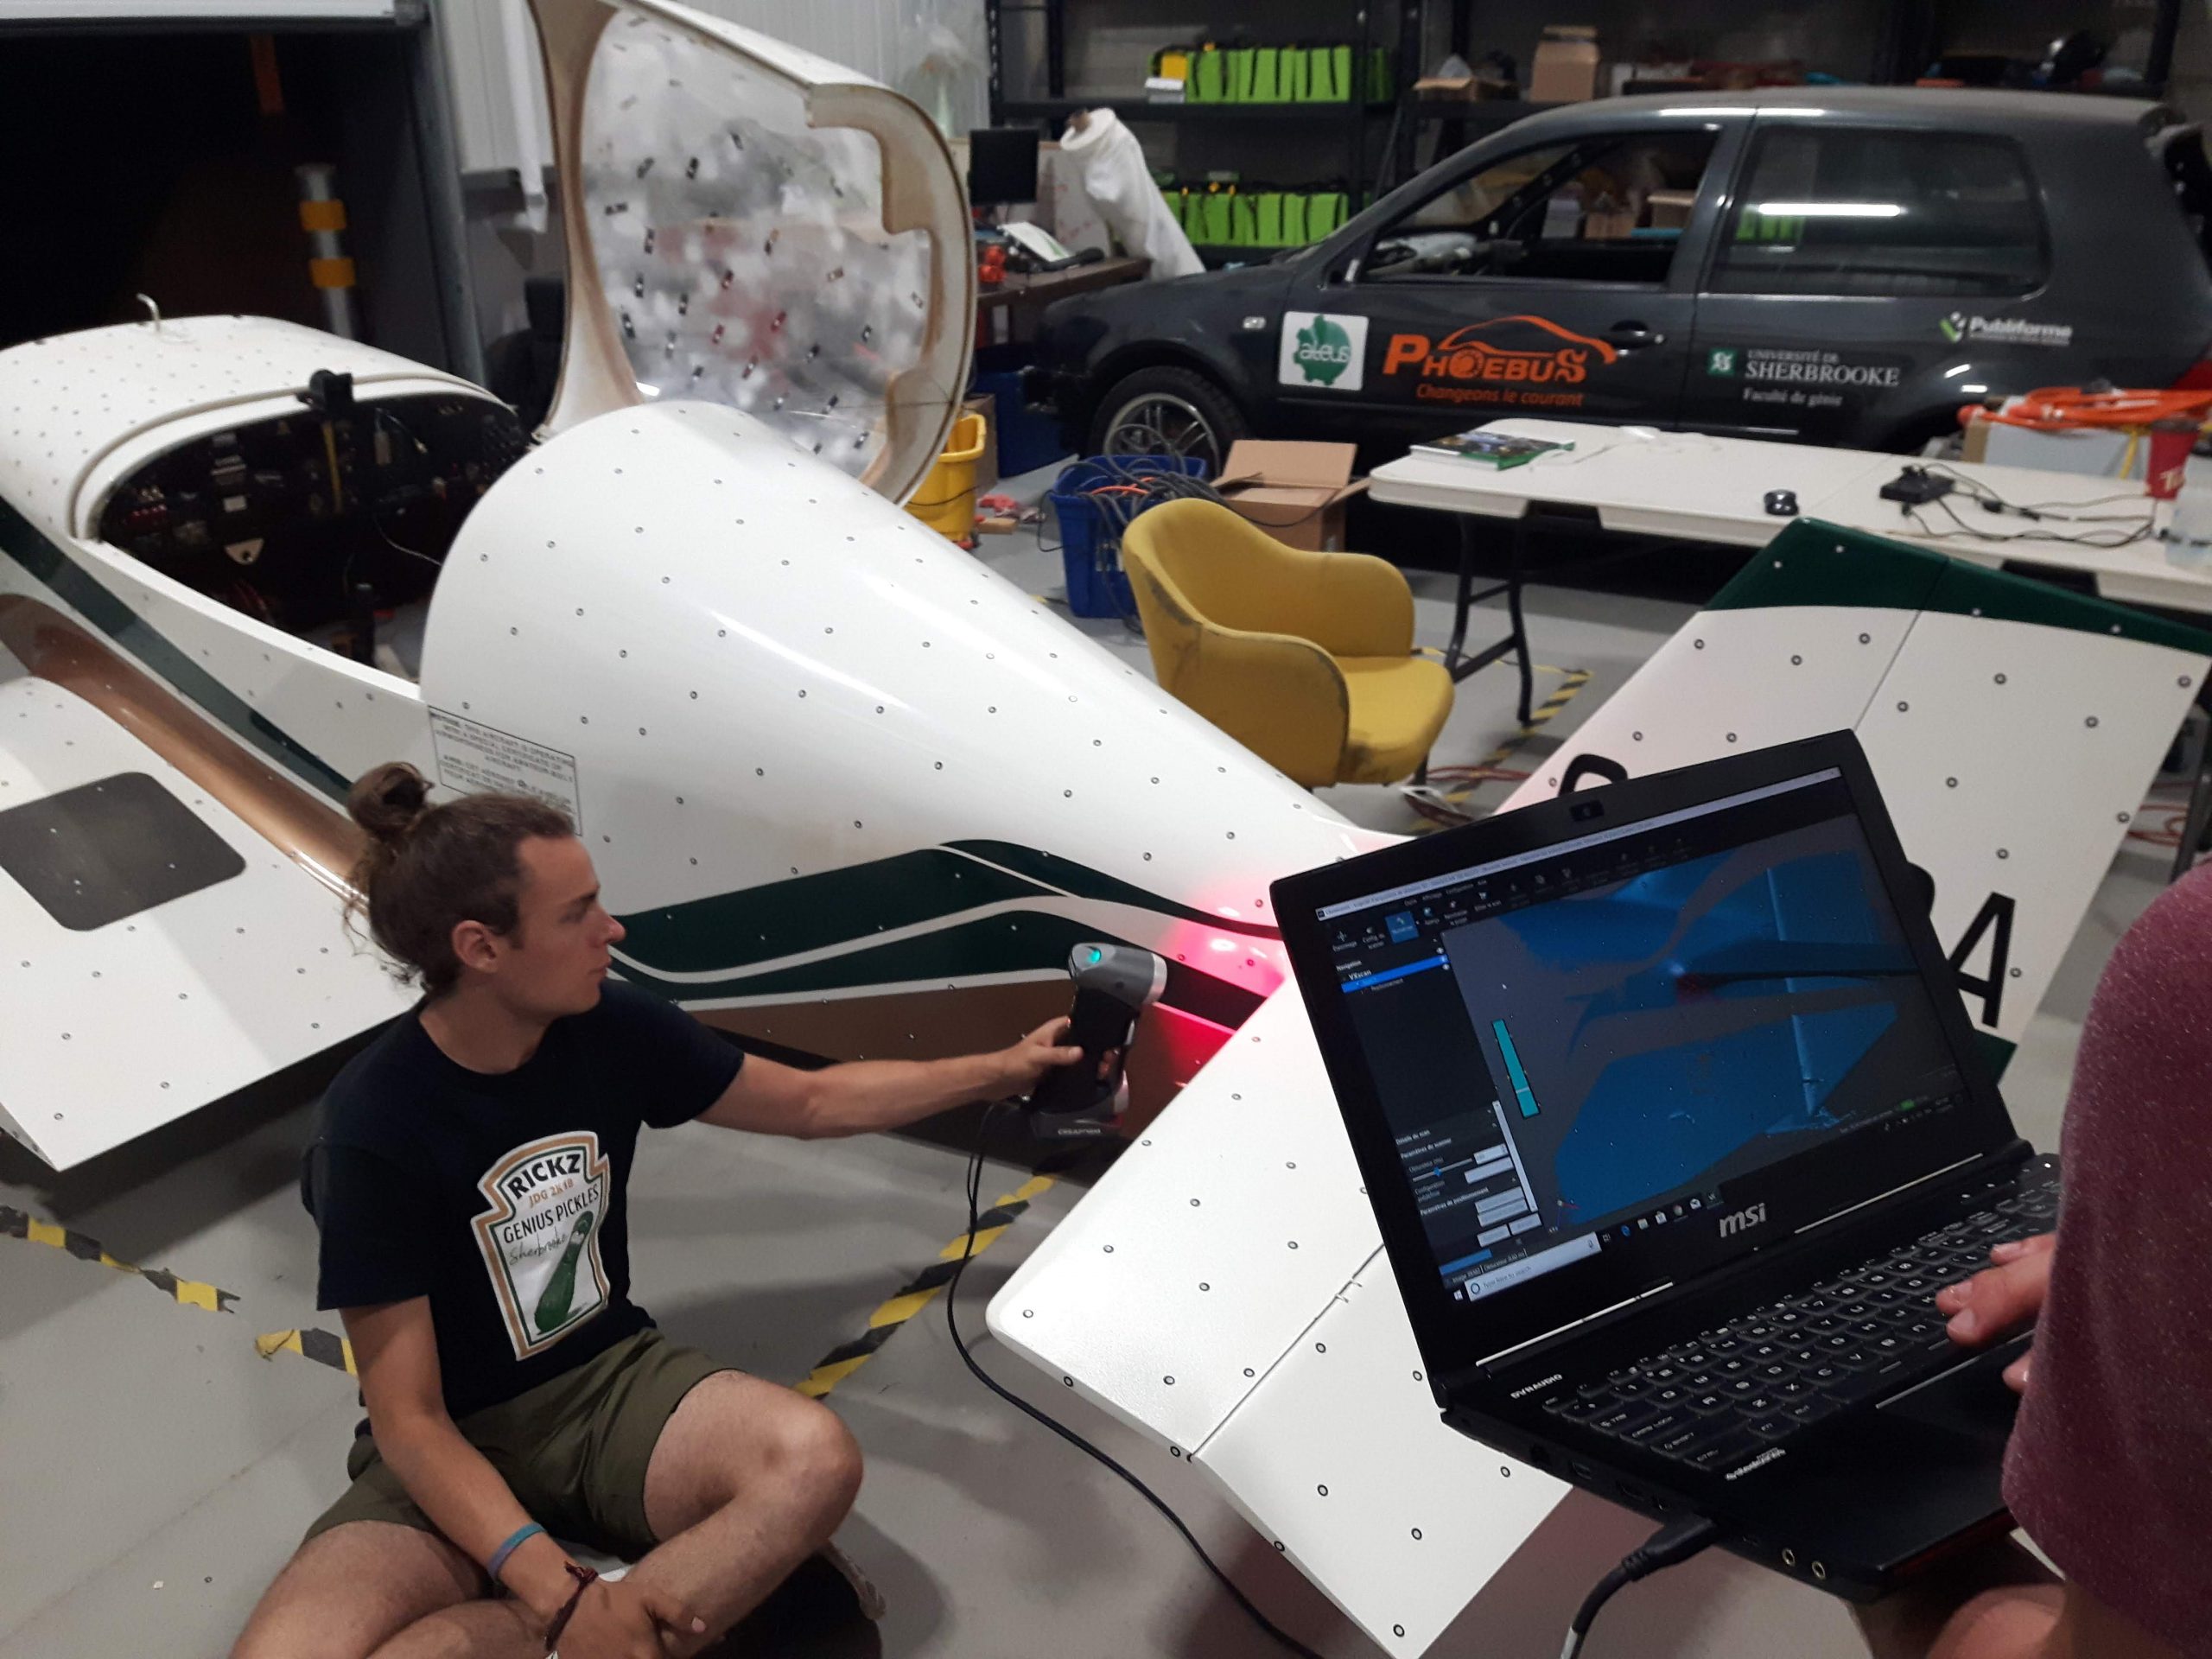 The team was able to get a high quality 3D model of the aircraft within one weekend to use in a CAD software